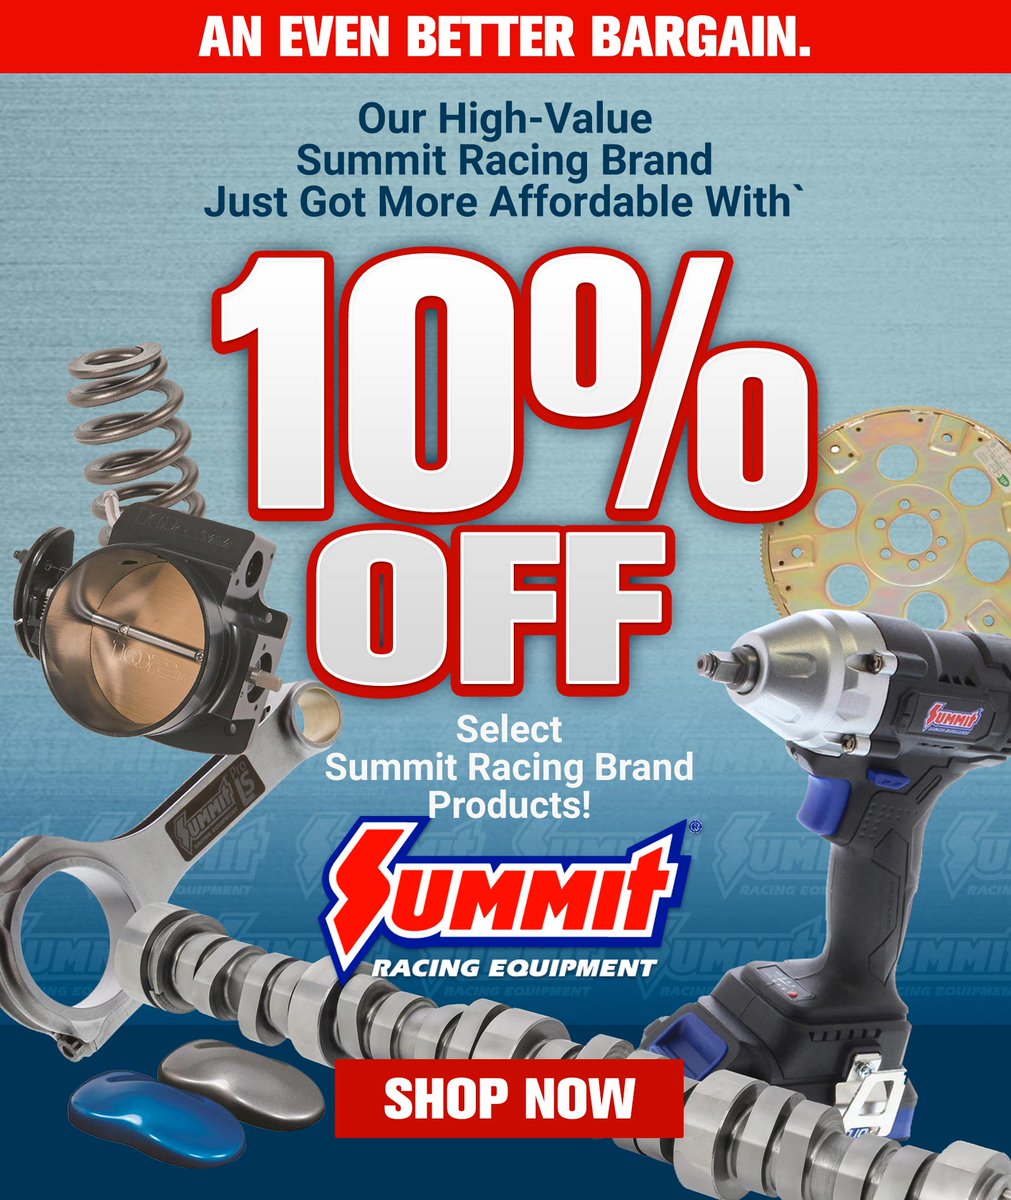 Summit Racing Equipment branded parts and accessories just got even more affordable with 10% OFF through May 5 on select Summit Racing brand products. 🏁 bit.ly/4dfRMxw 🏁